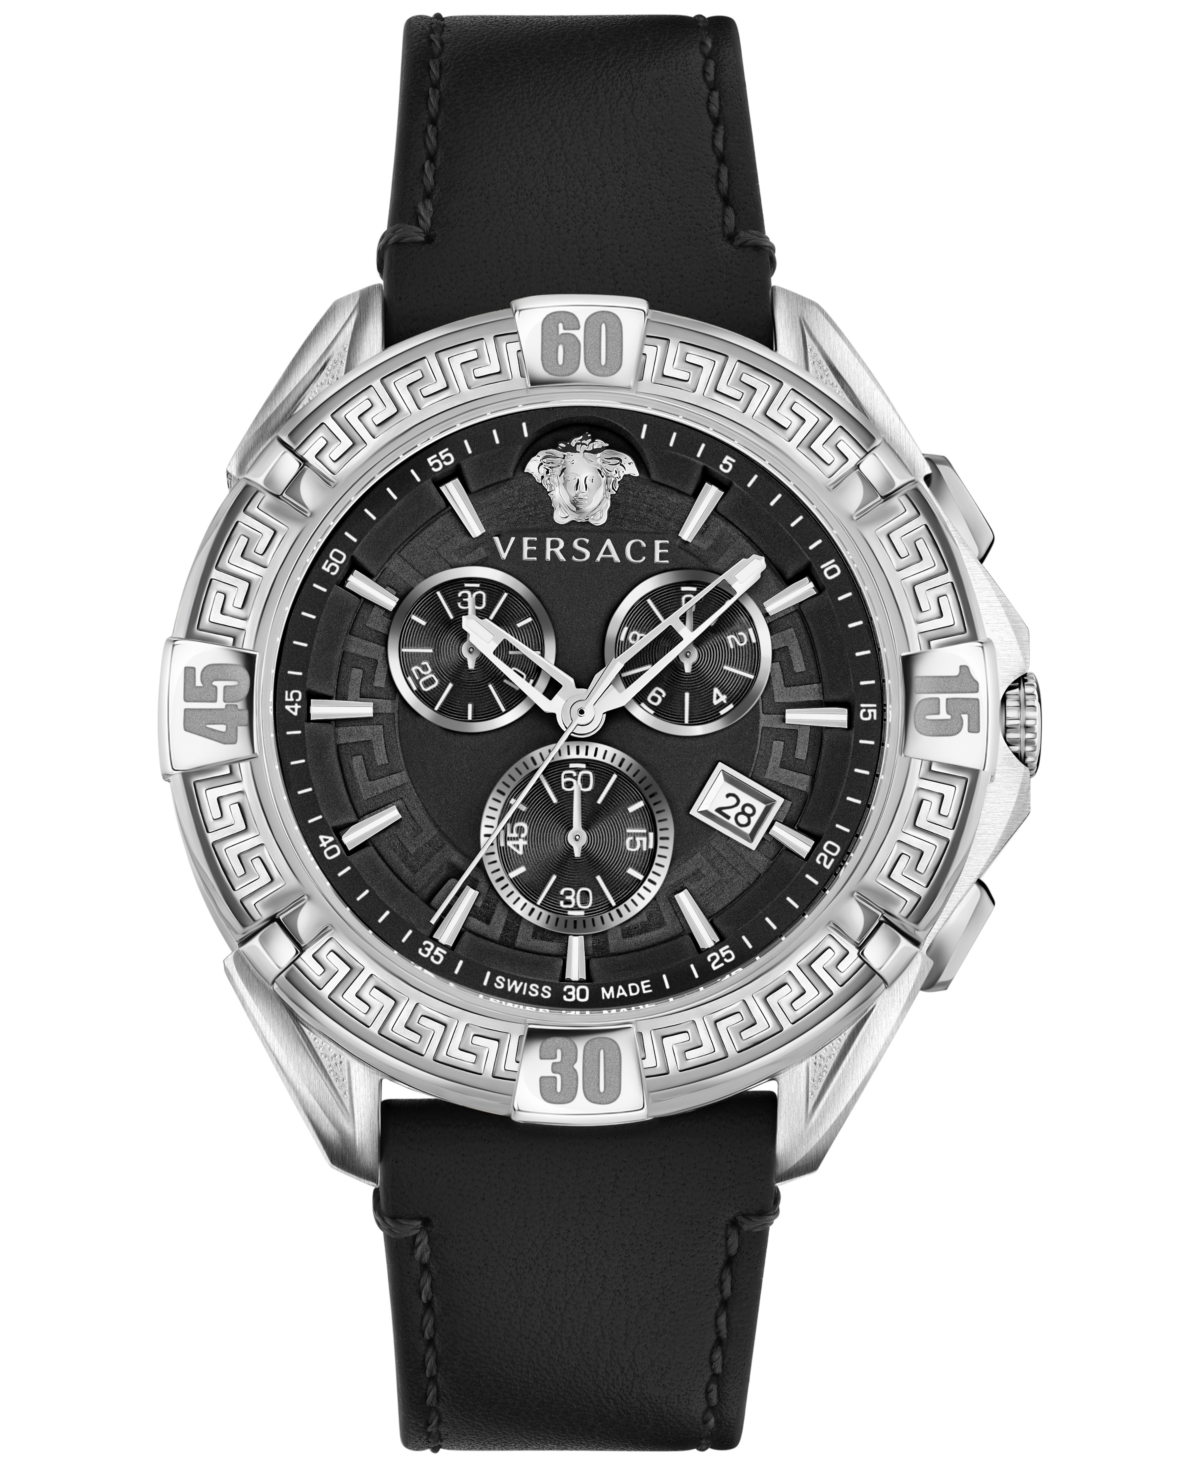 Versace Men's Swiss Chronograph V-greca Black Leather Strap Watch 46mm In Stainless Steel